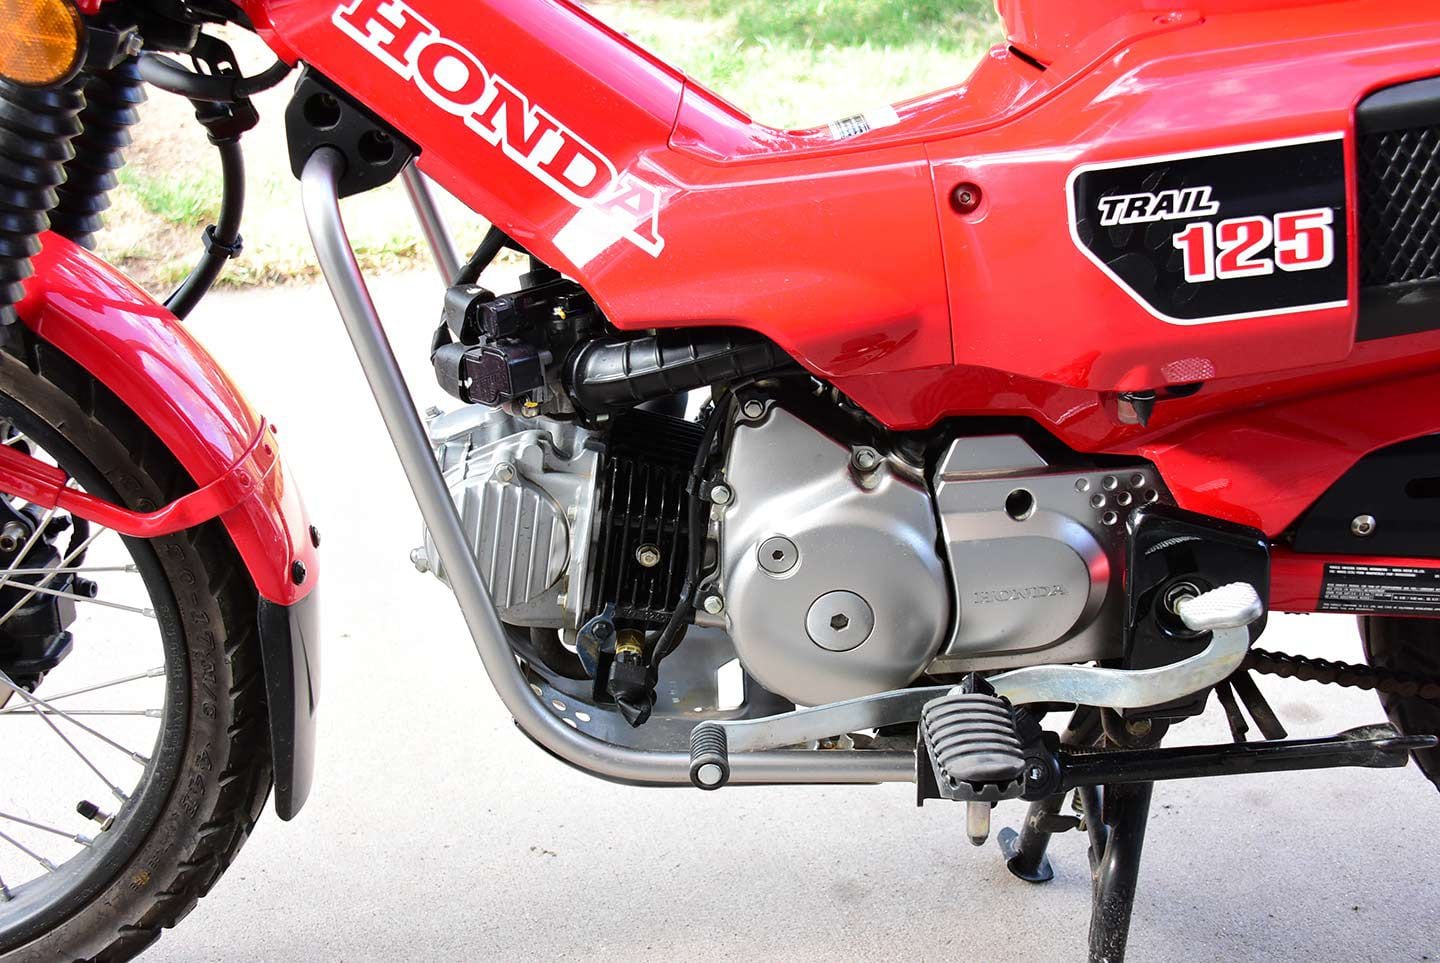 Honda’s 124.9cc single is fuel injected and fires up instantly no matter the ambient outside temperature.